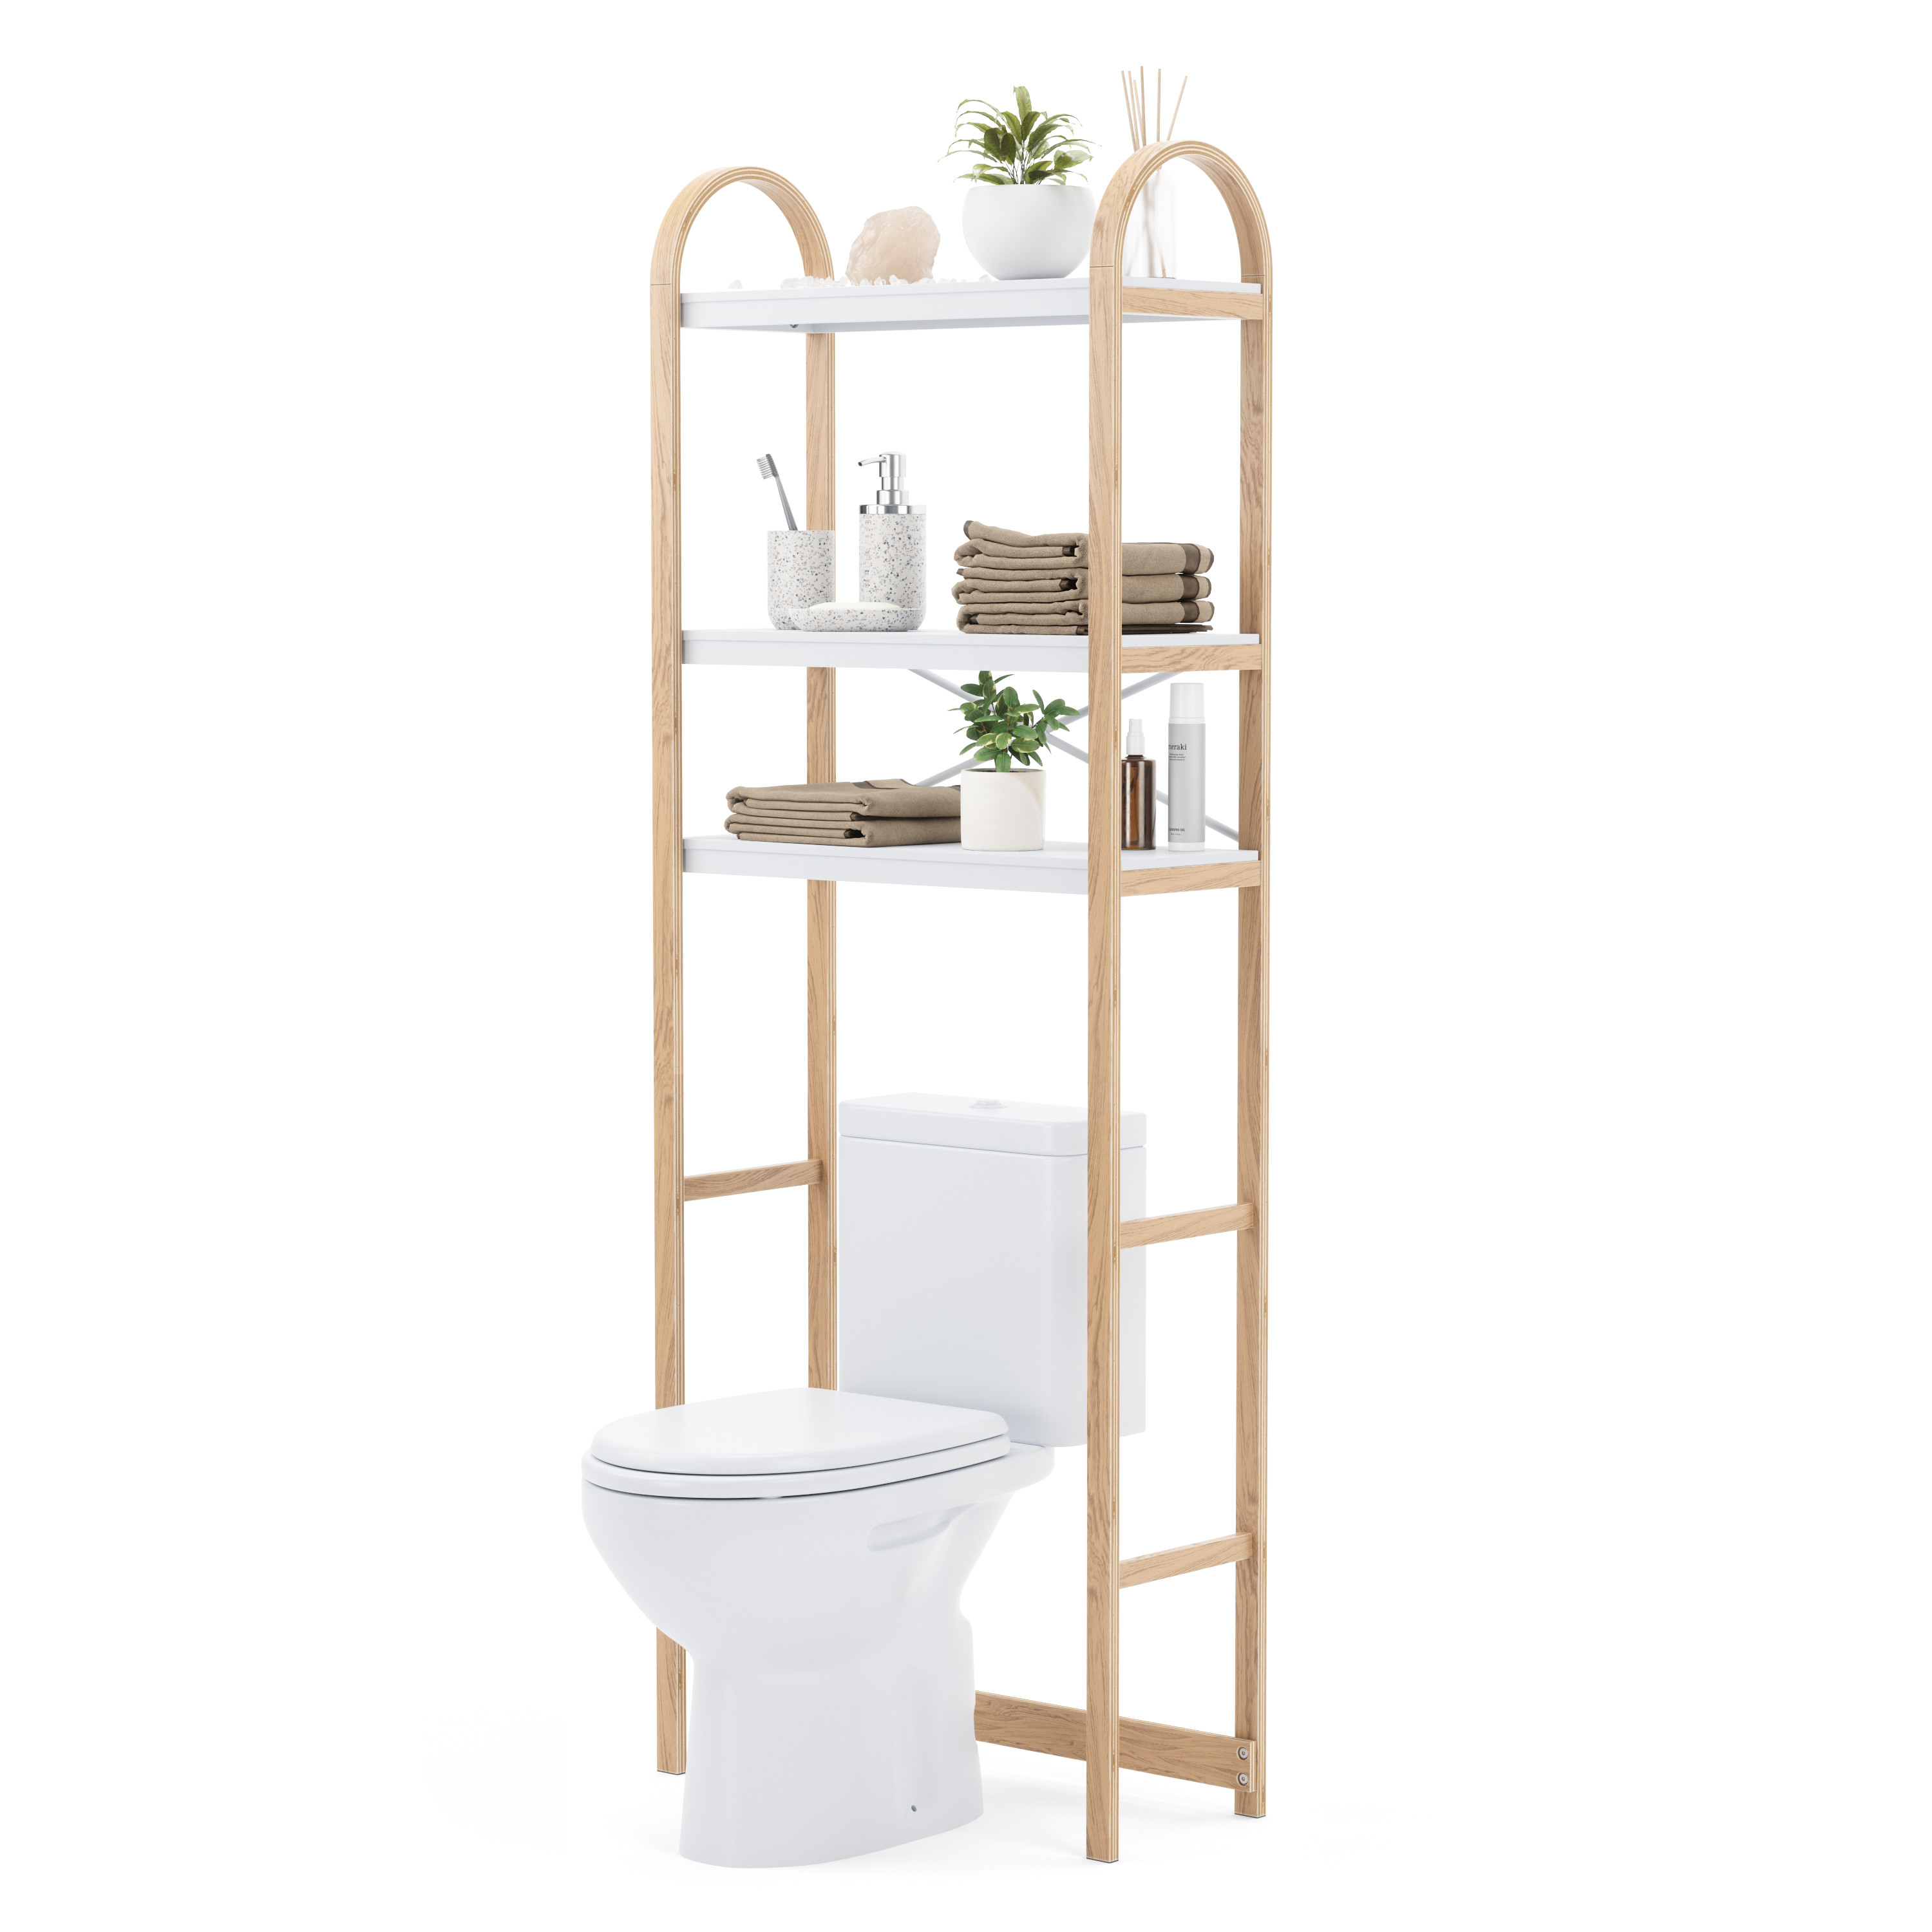 Umbra Bellwood Over the Toilet Shelf | The Container Store